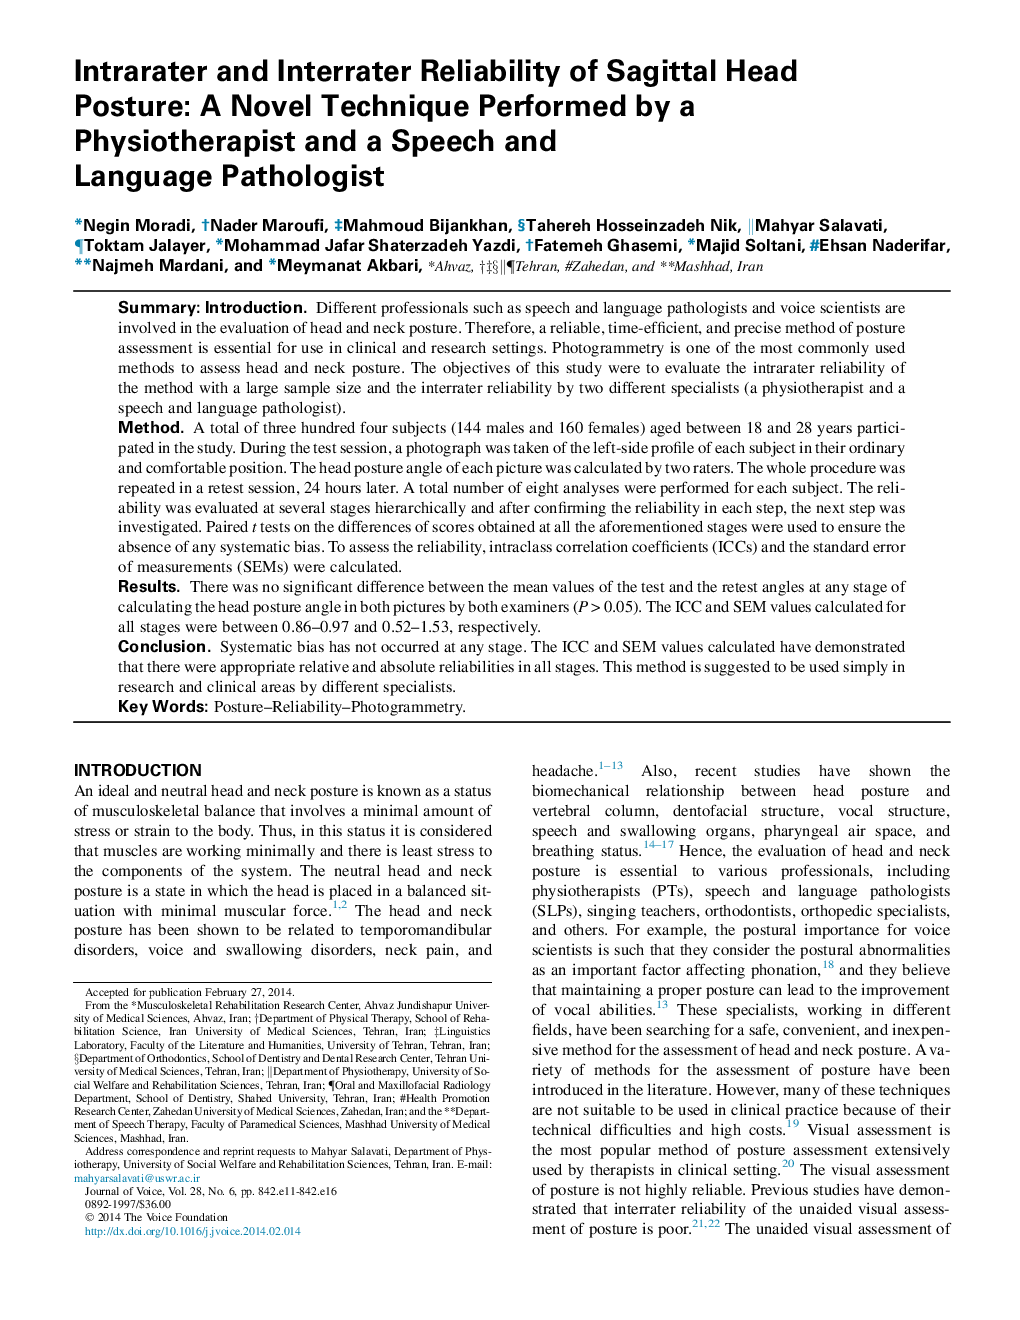 Intrarater and Interrater Reliability of Sagittal Head Posture: A Novel Technique Performed by a Physiotherapist and a Speech and Language Pathologist